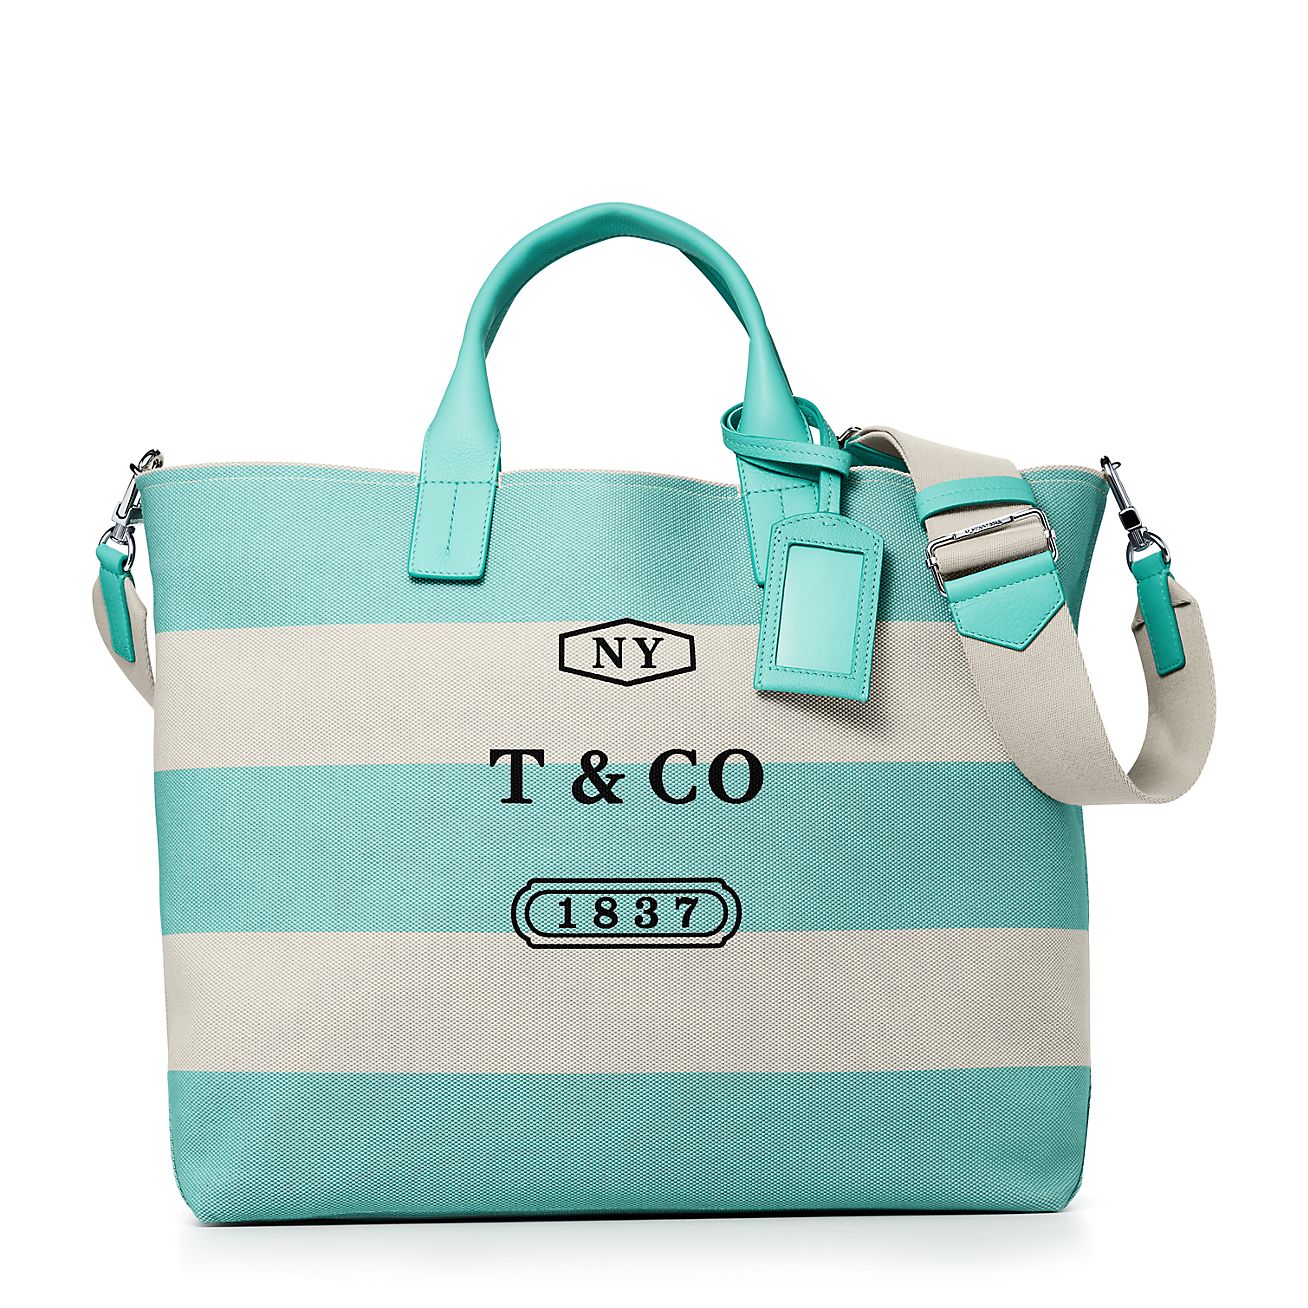 tiffany and co tote